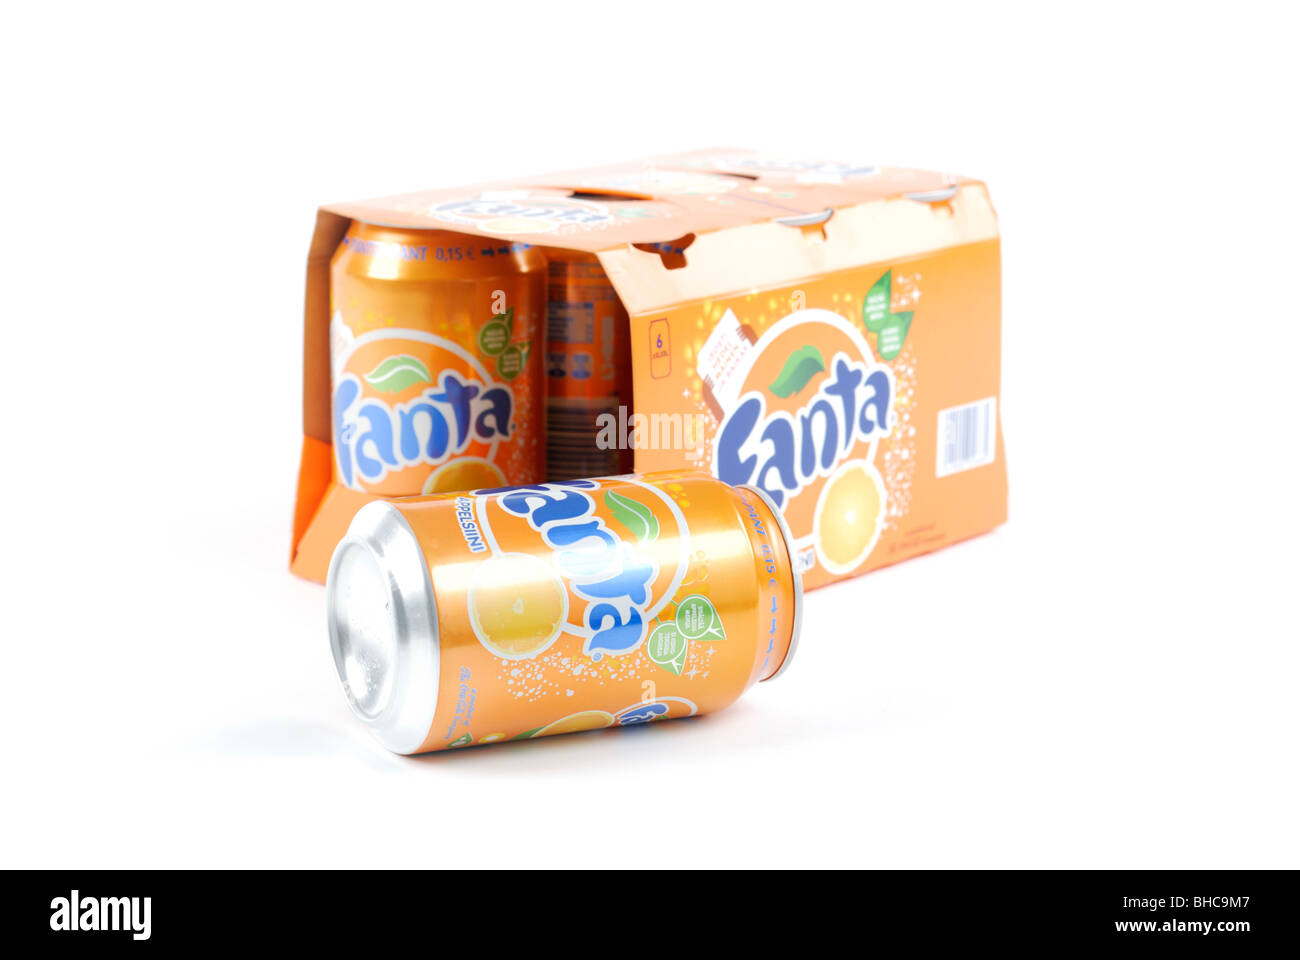 Fanta soft drink cans Stock Photo